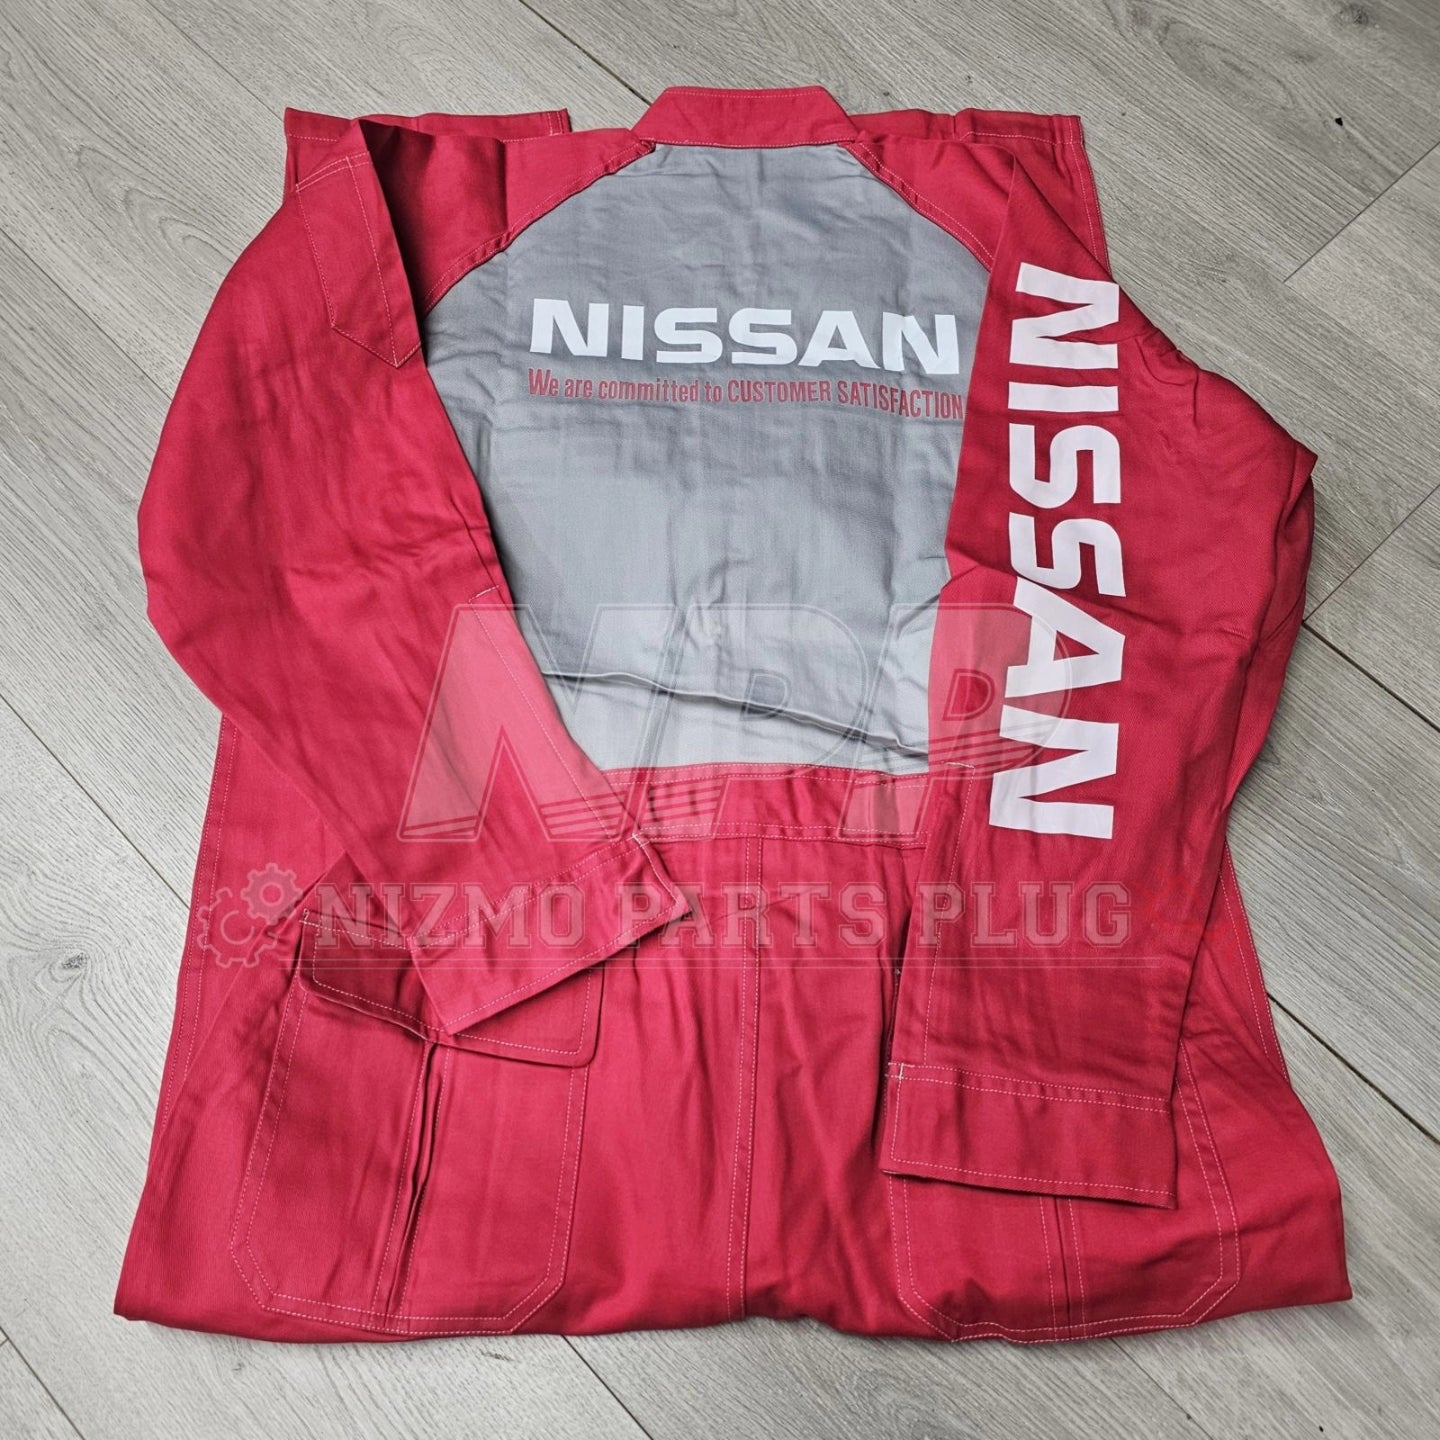 AuthenticWear Japan Nissan Altia Mechanic Work Overalls Red 2LL